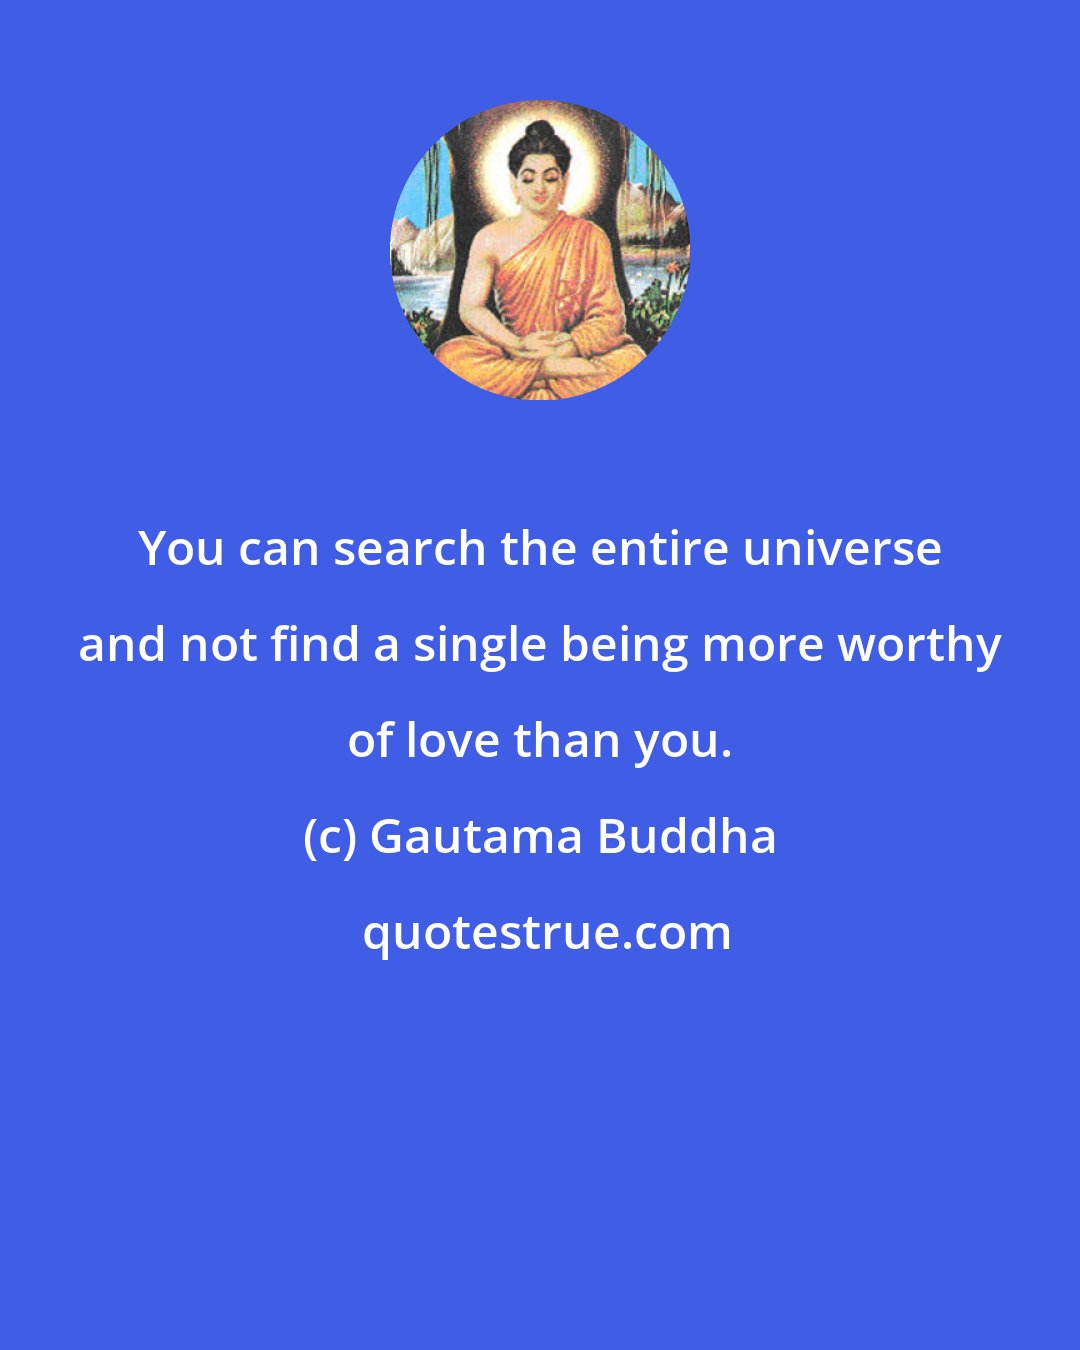 Gautama Buddha: You can search the entire universe and not find a single being more worthy of love than you.